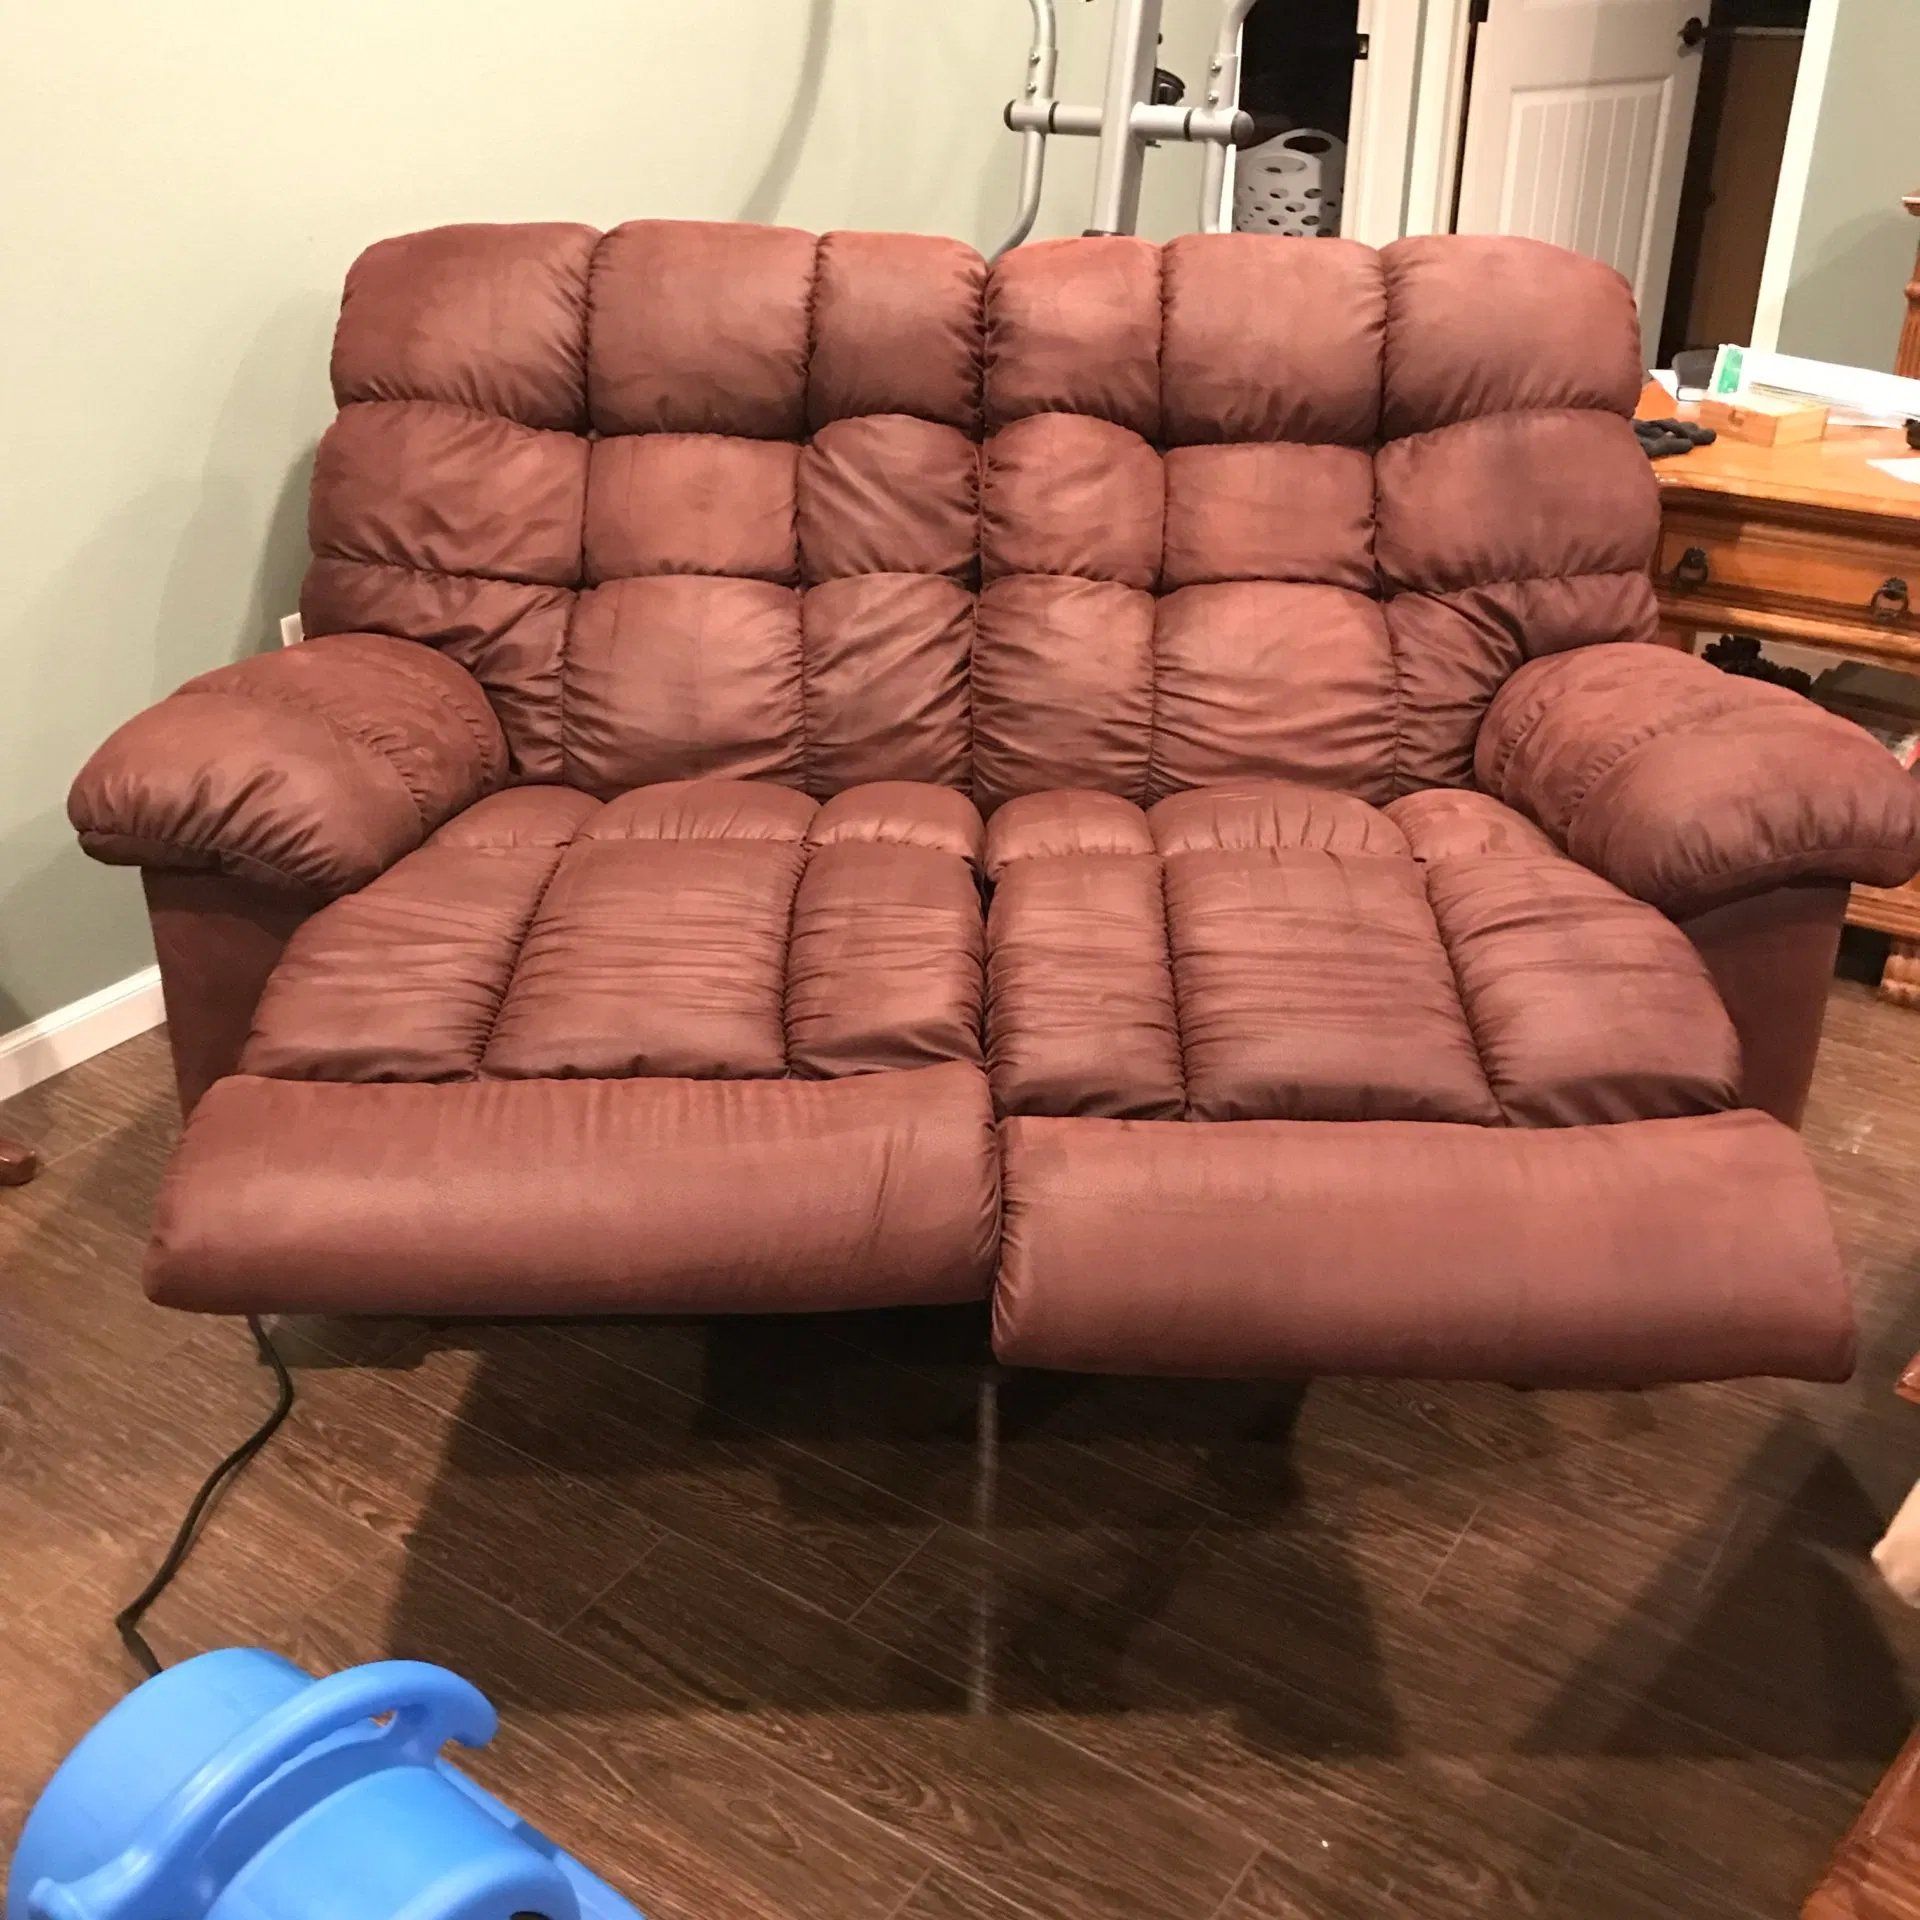 furniture upholstery cleaning service hutchinson ks